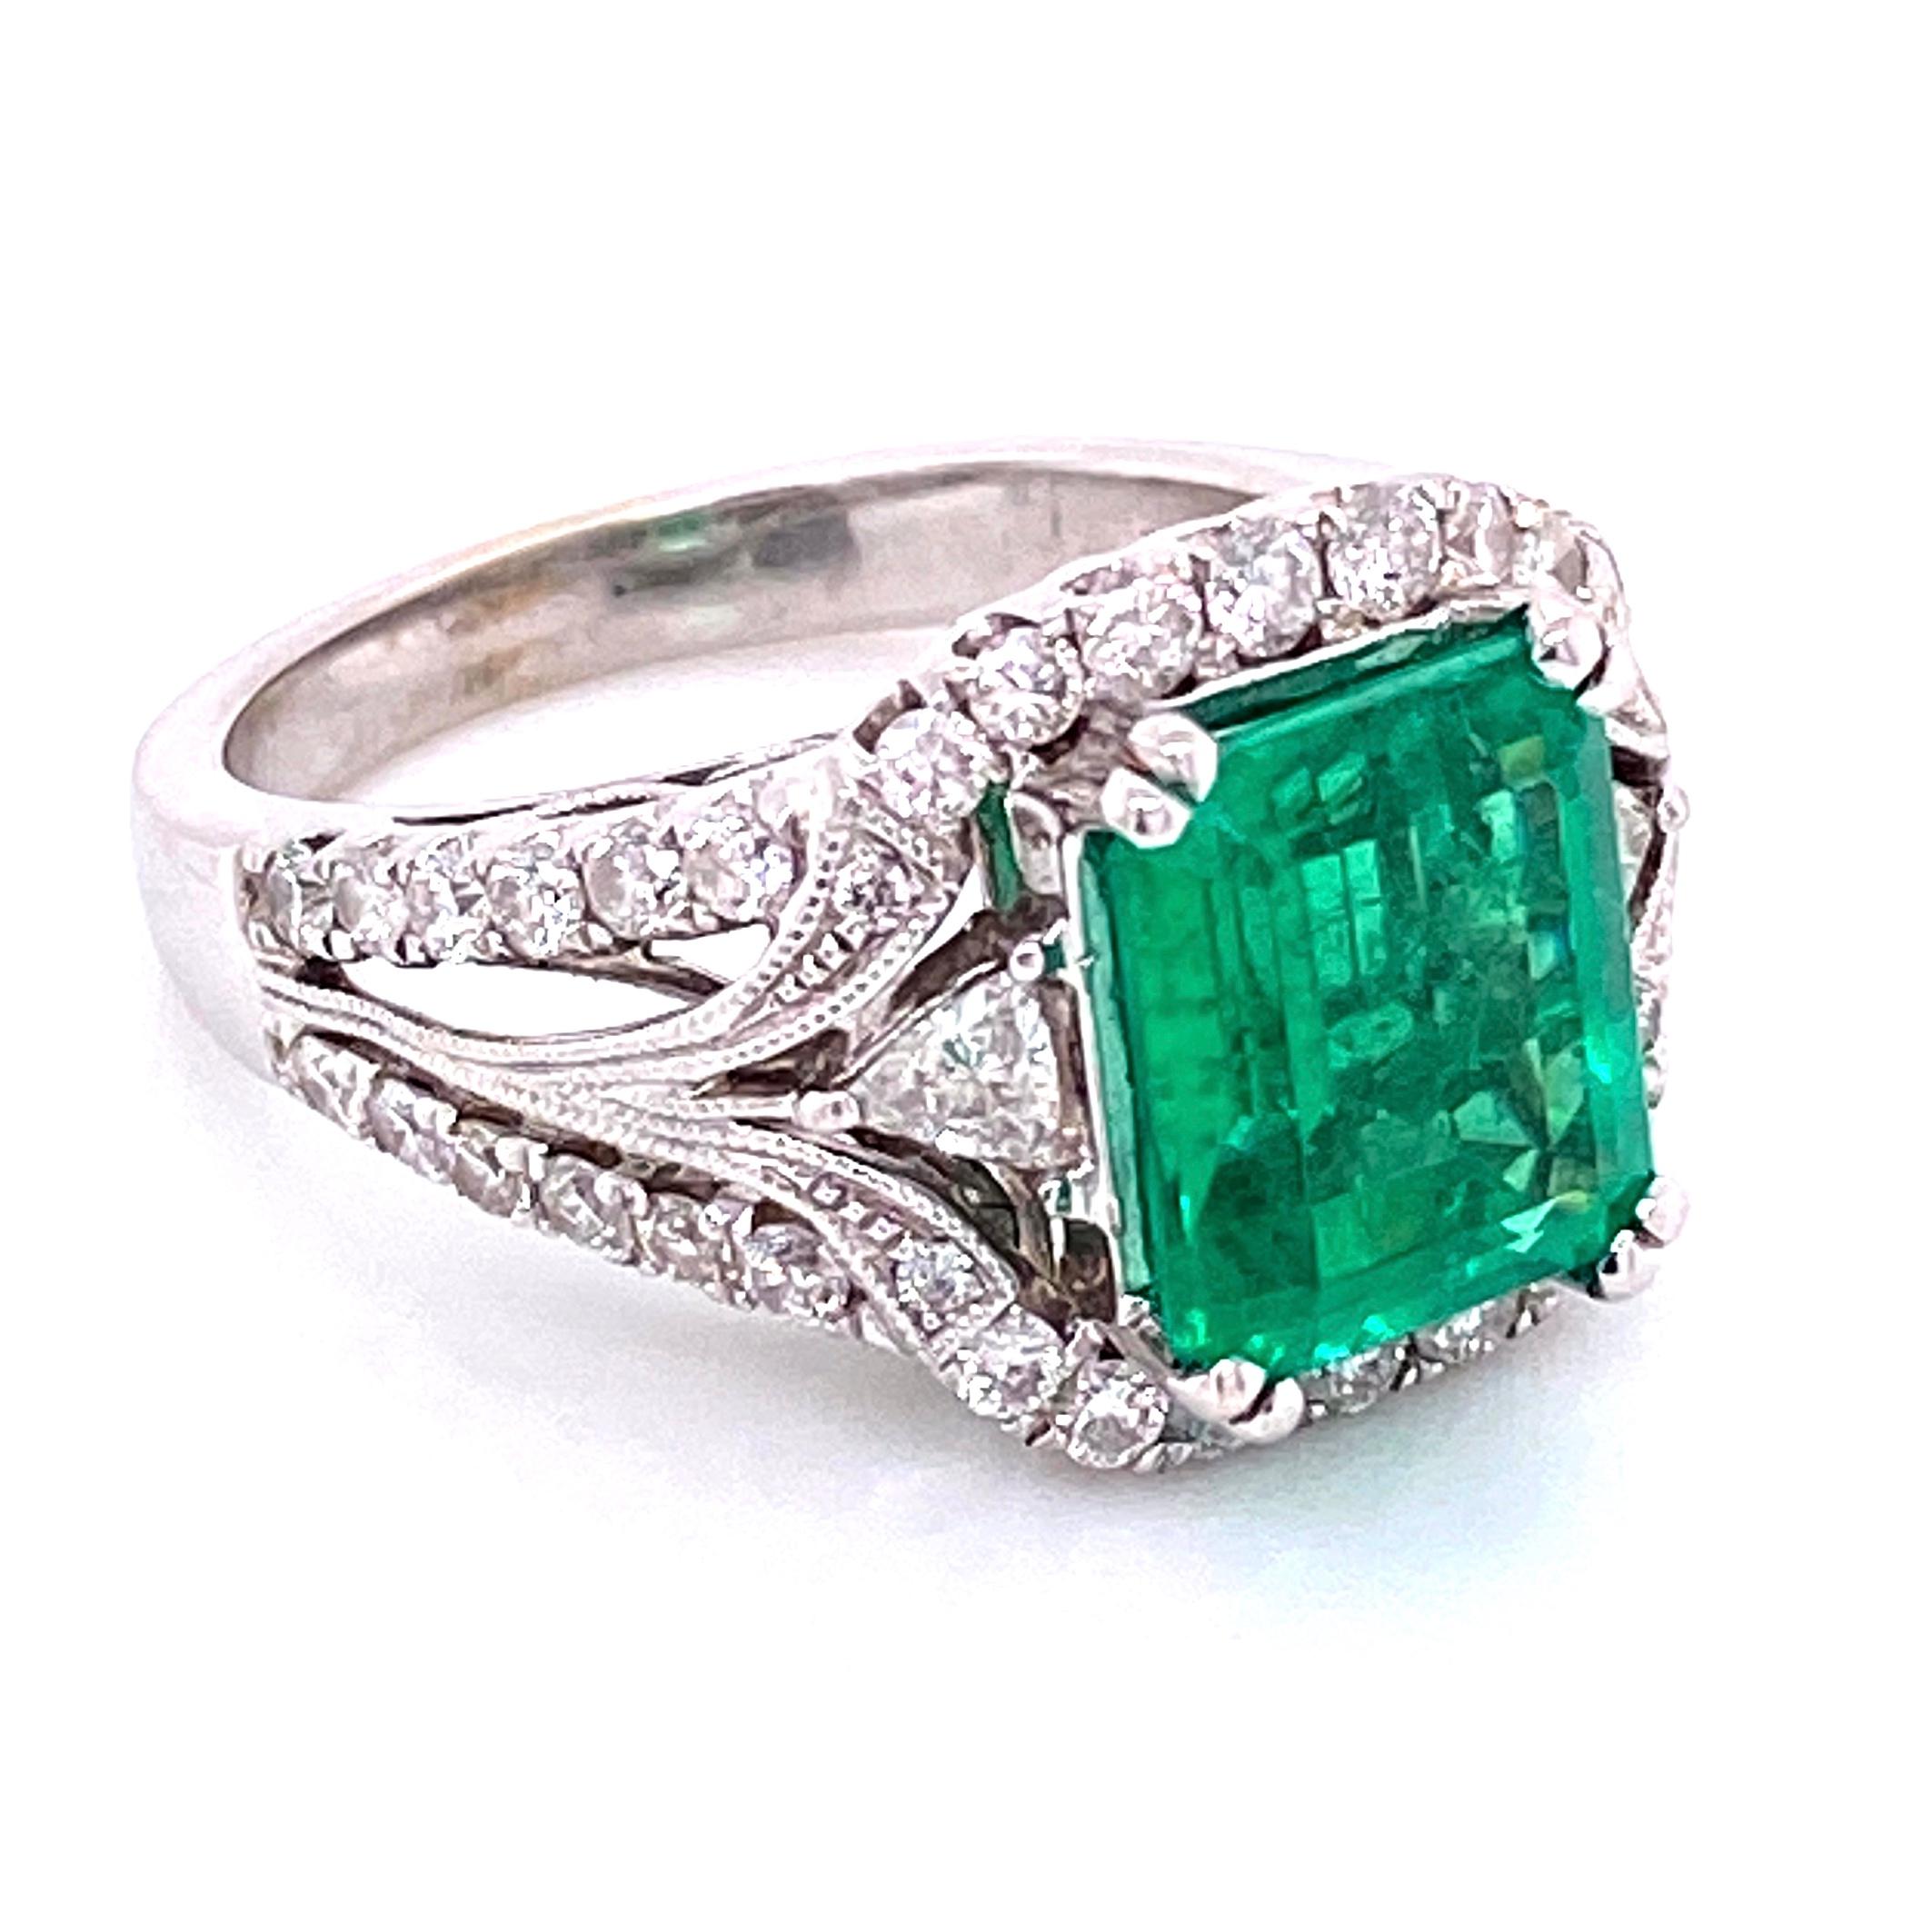 Simply Beautiful and finely detailed White Gold Cocktail Ring, center Hand set with a securely nestled 2.75 Carat Emerald-cut Emerald, Amazing color! Surrounded by round Diamonds, weighing approx. 1.20tcw, including side Diamonds enhancing the